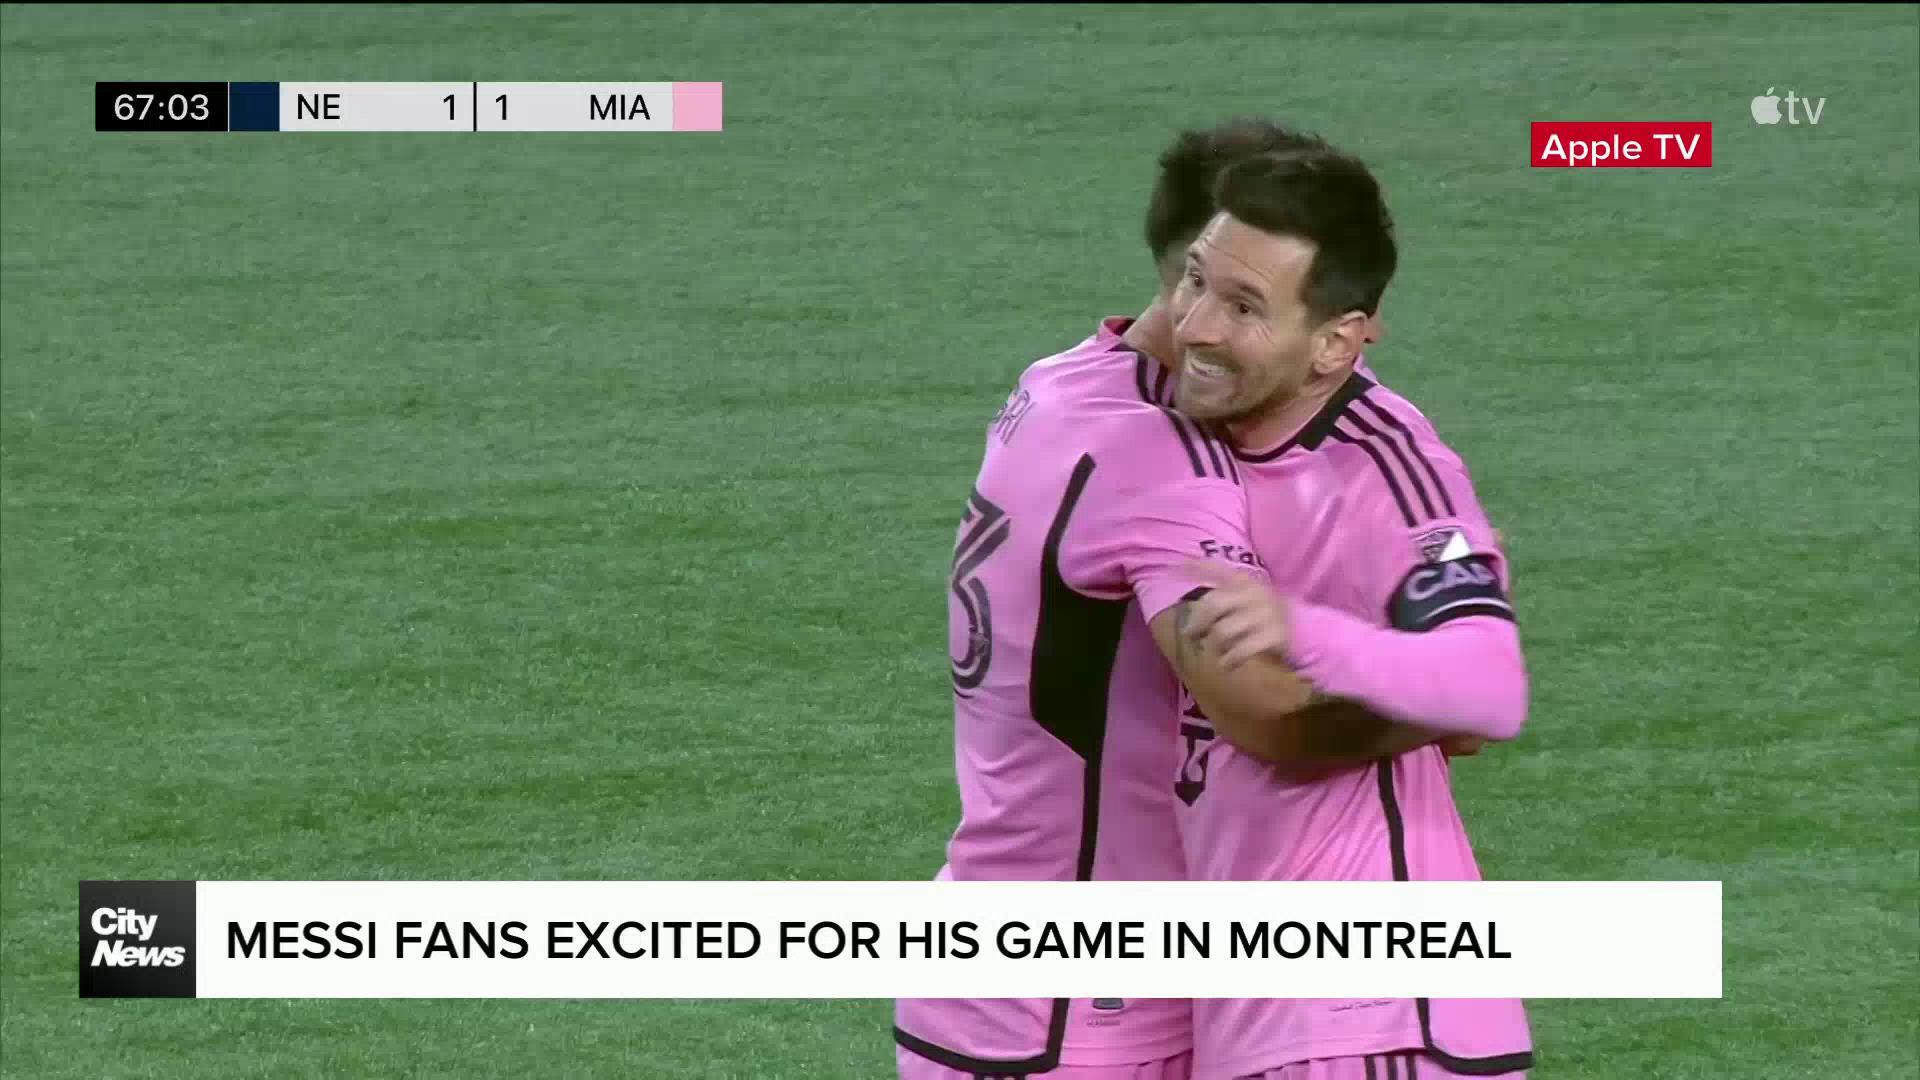 Lionel Messi fans excited about his game in Montreal on Saturday